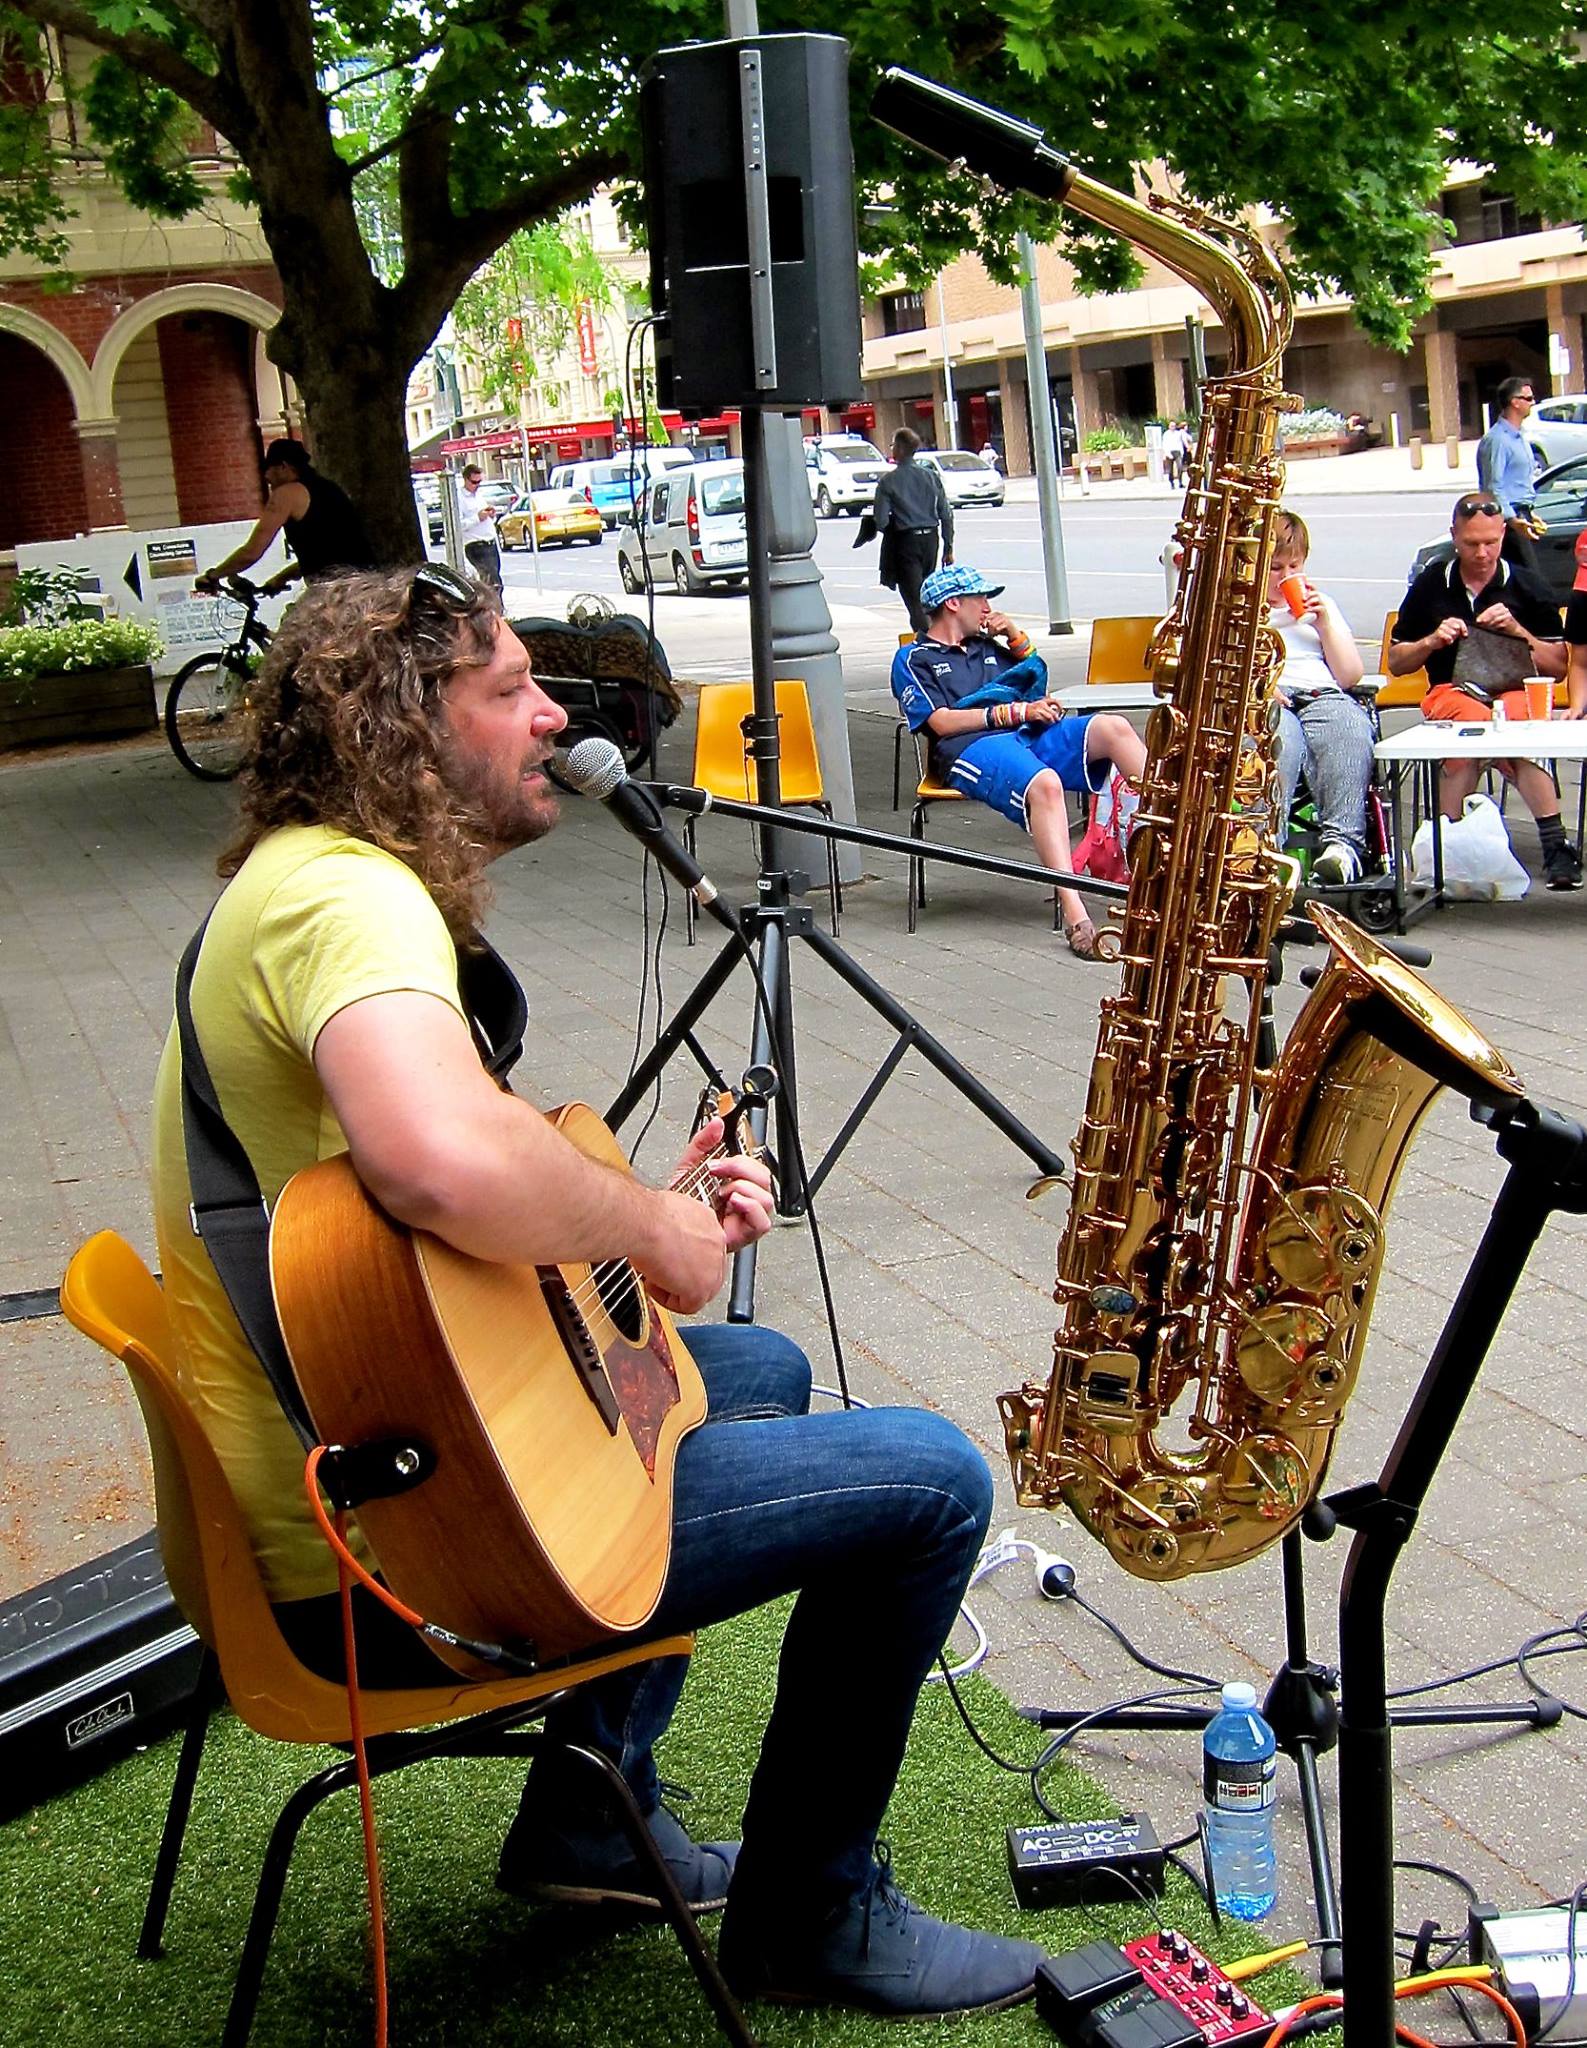 Lunchtime in the city, Ferg brought his guitar, loop pedal and levitating saxophone